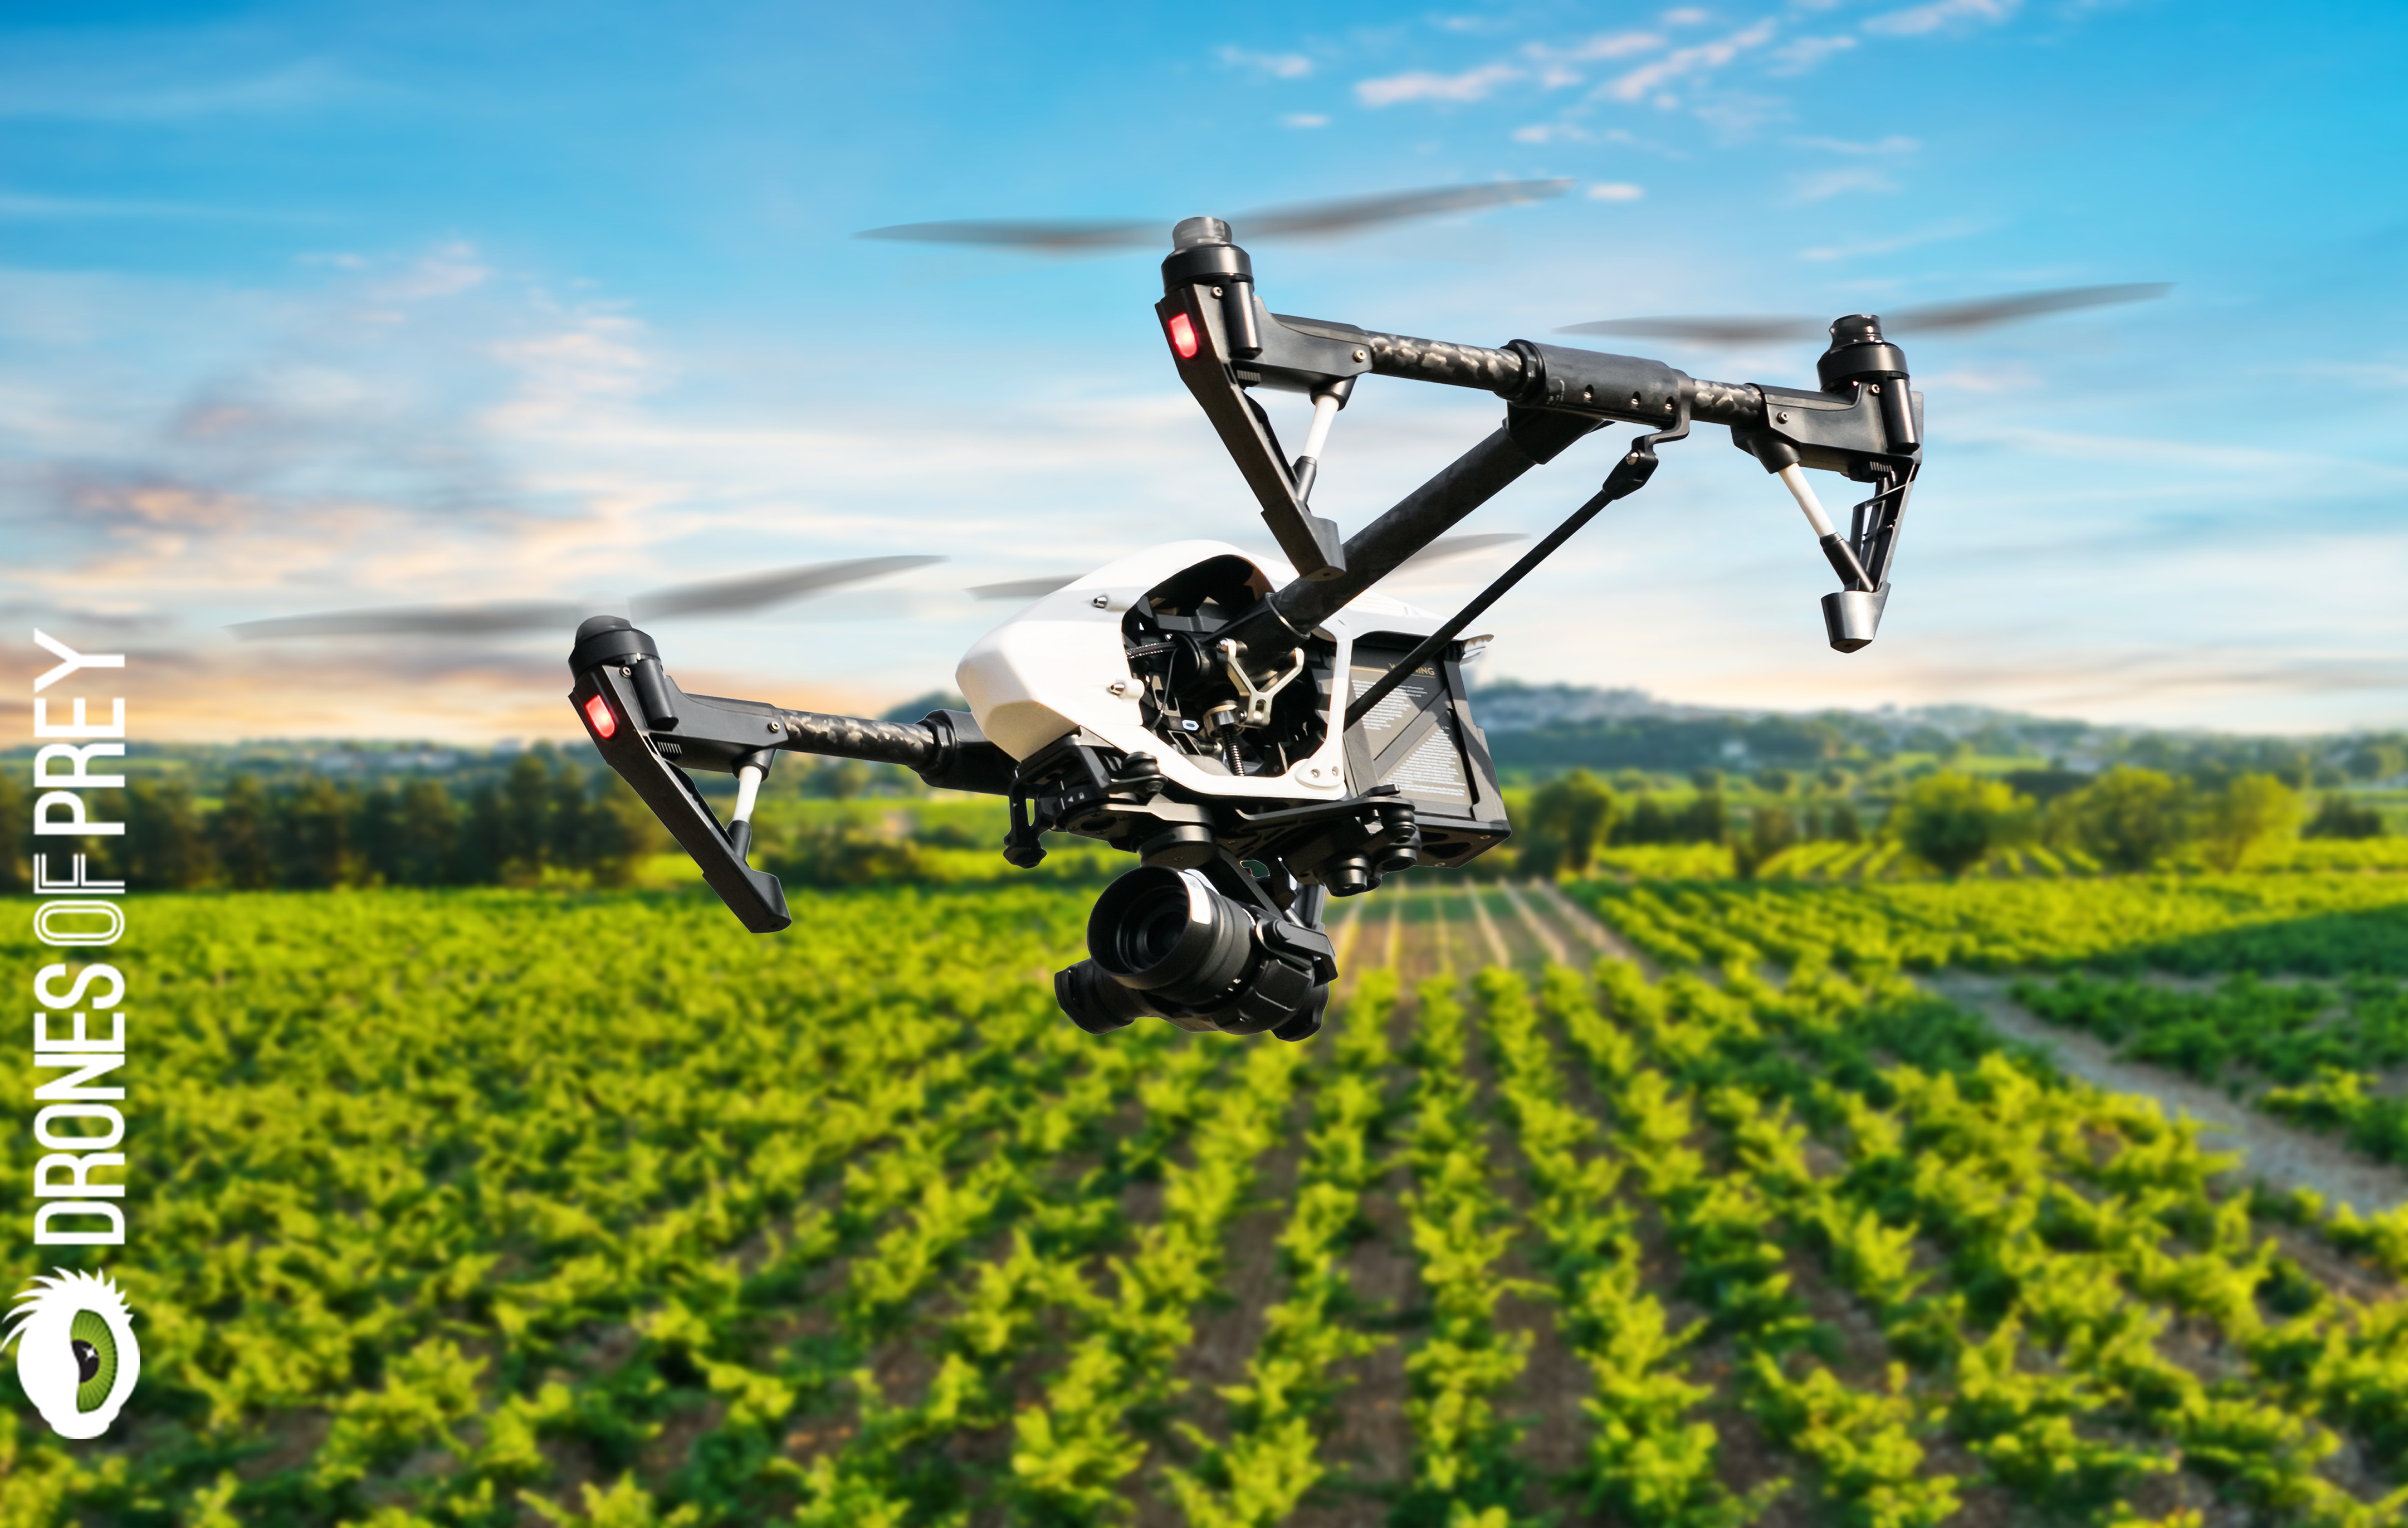 Agriculture Drone